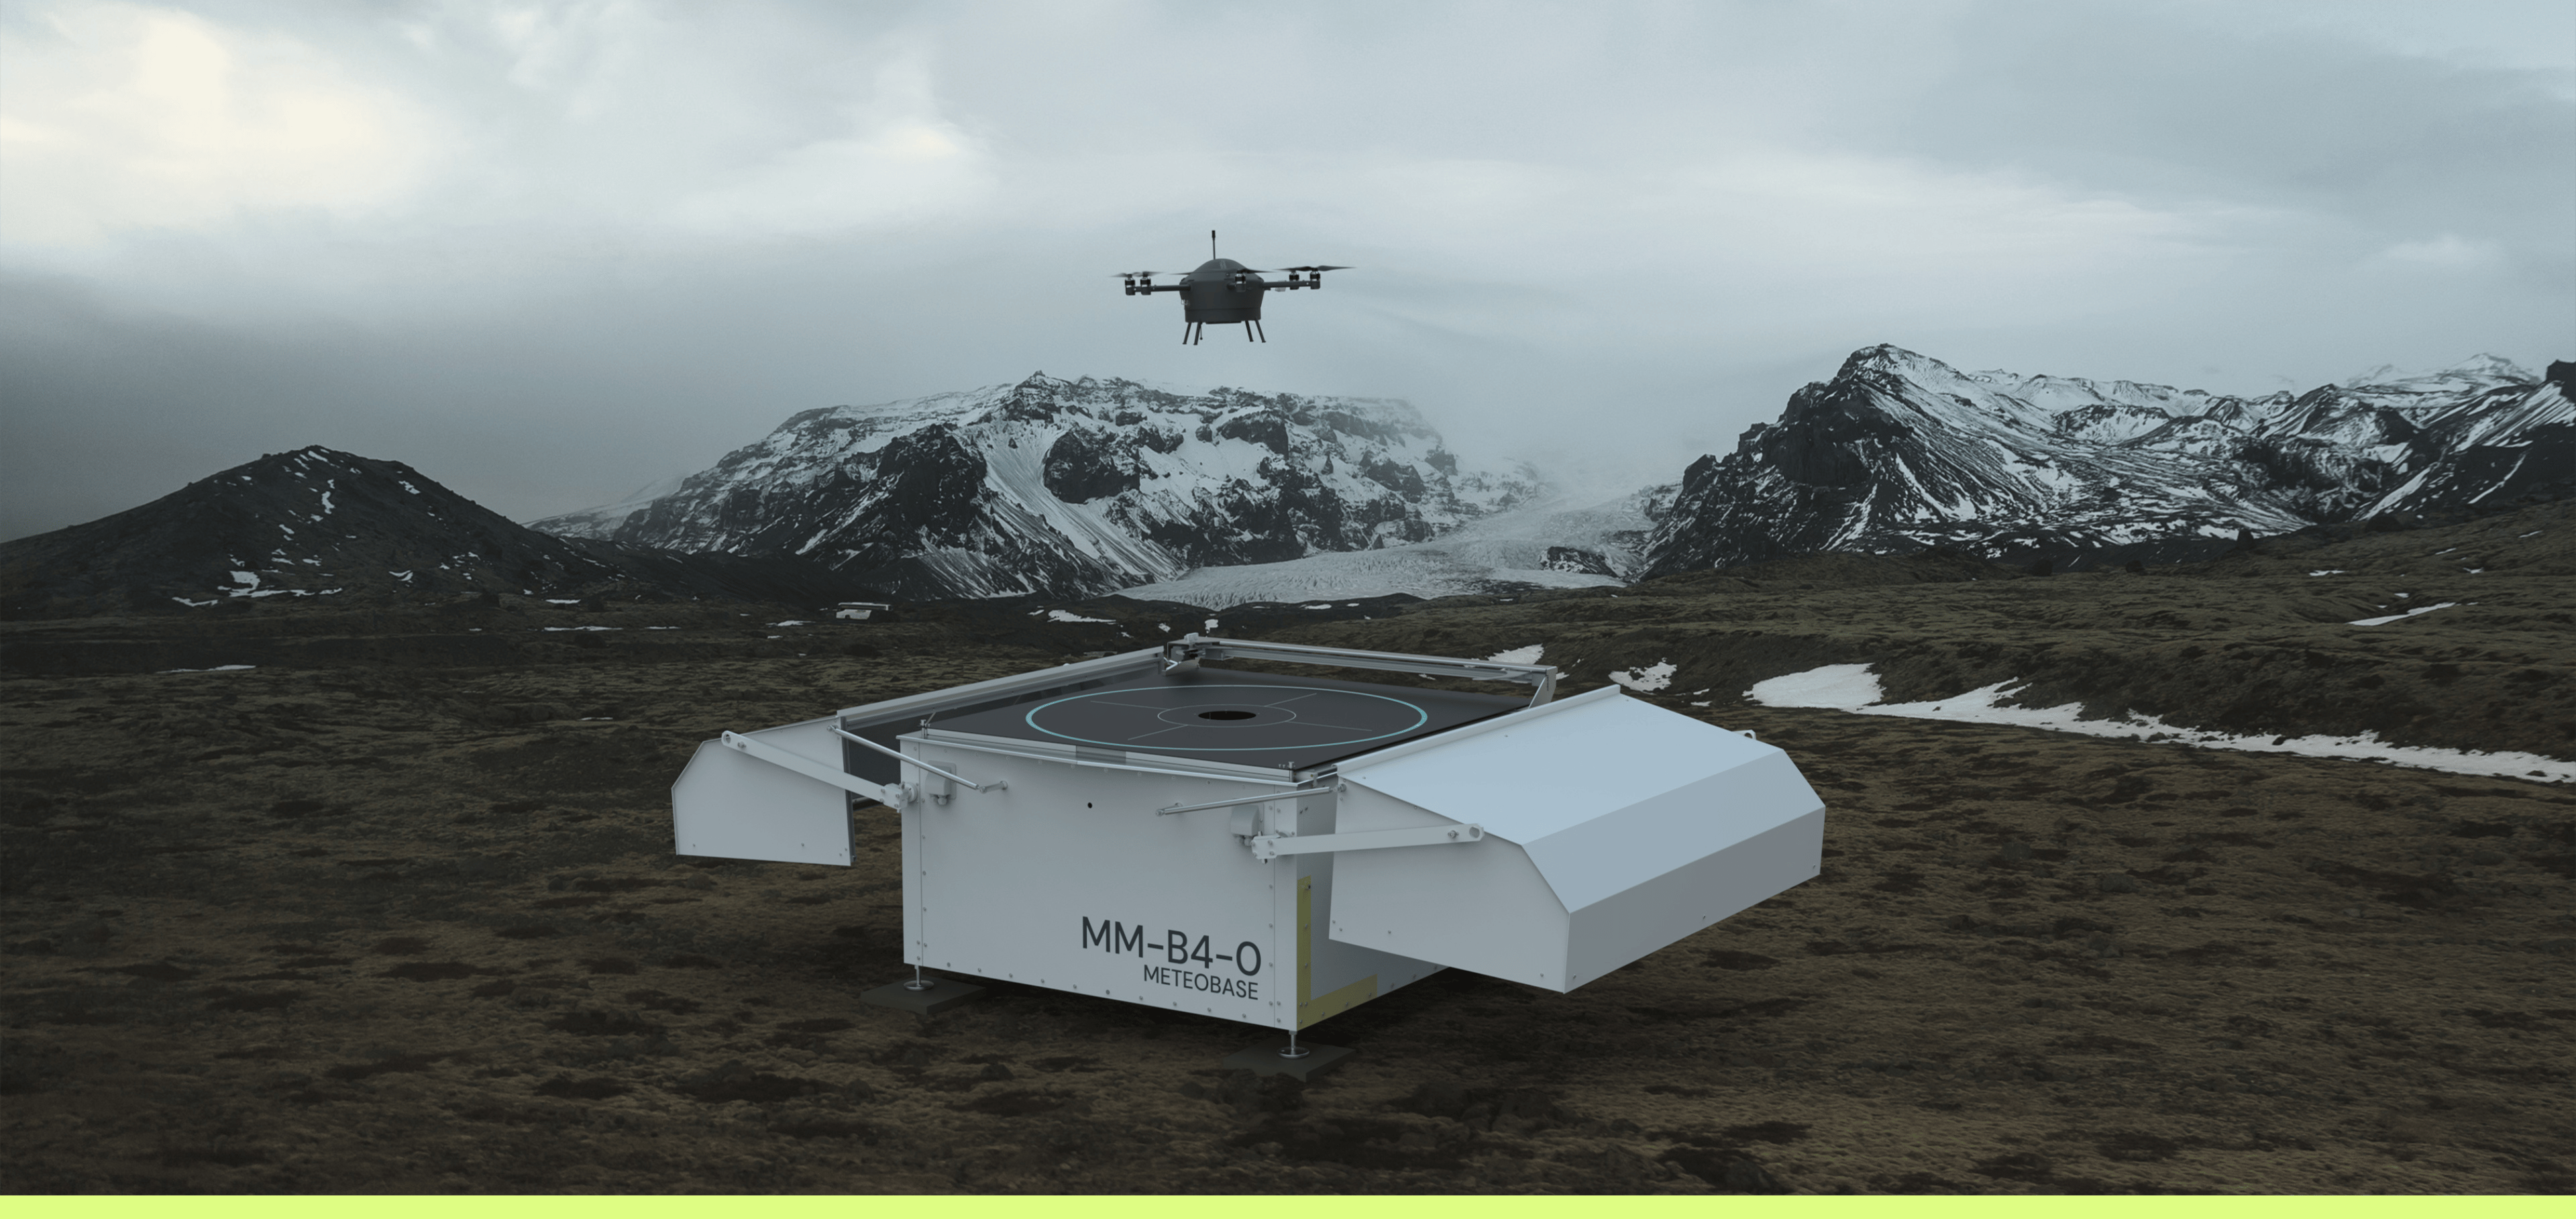 30 Meteobases will be installed in Norway by 2025